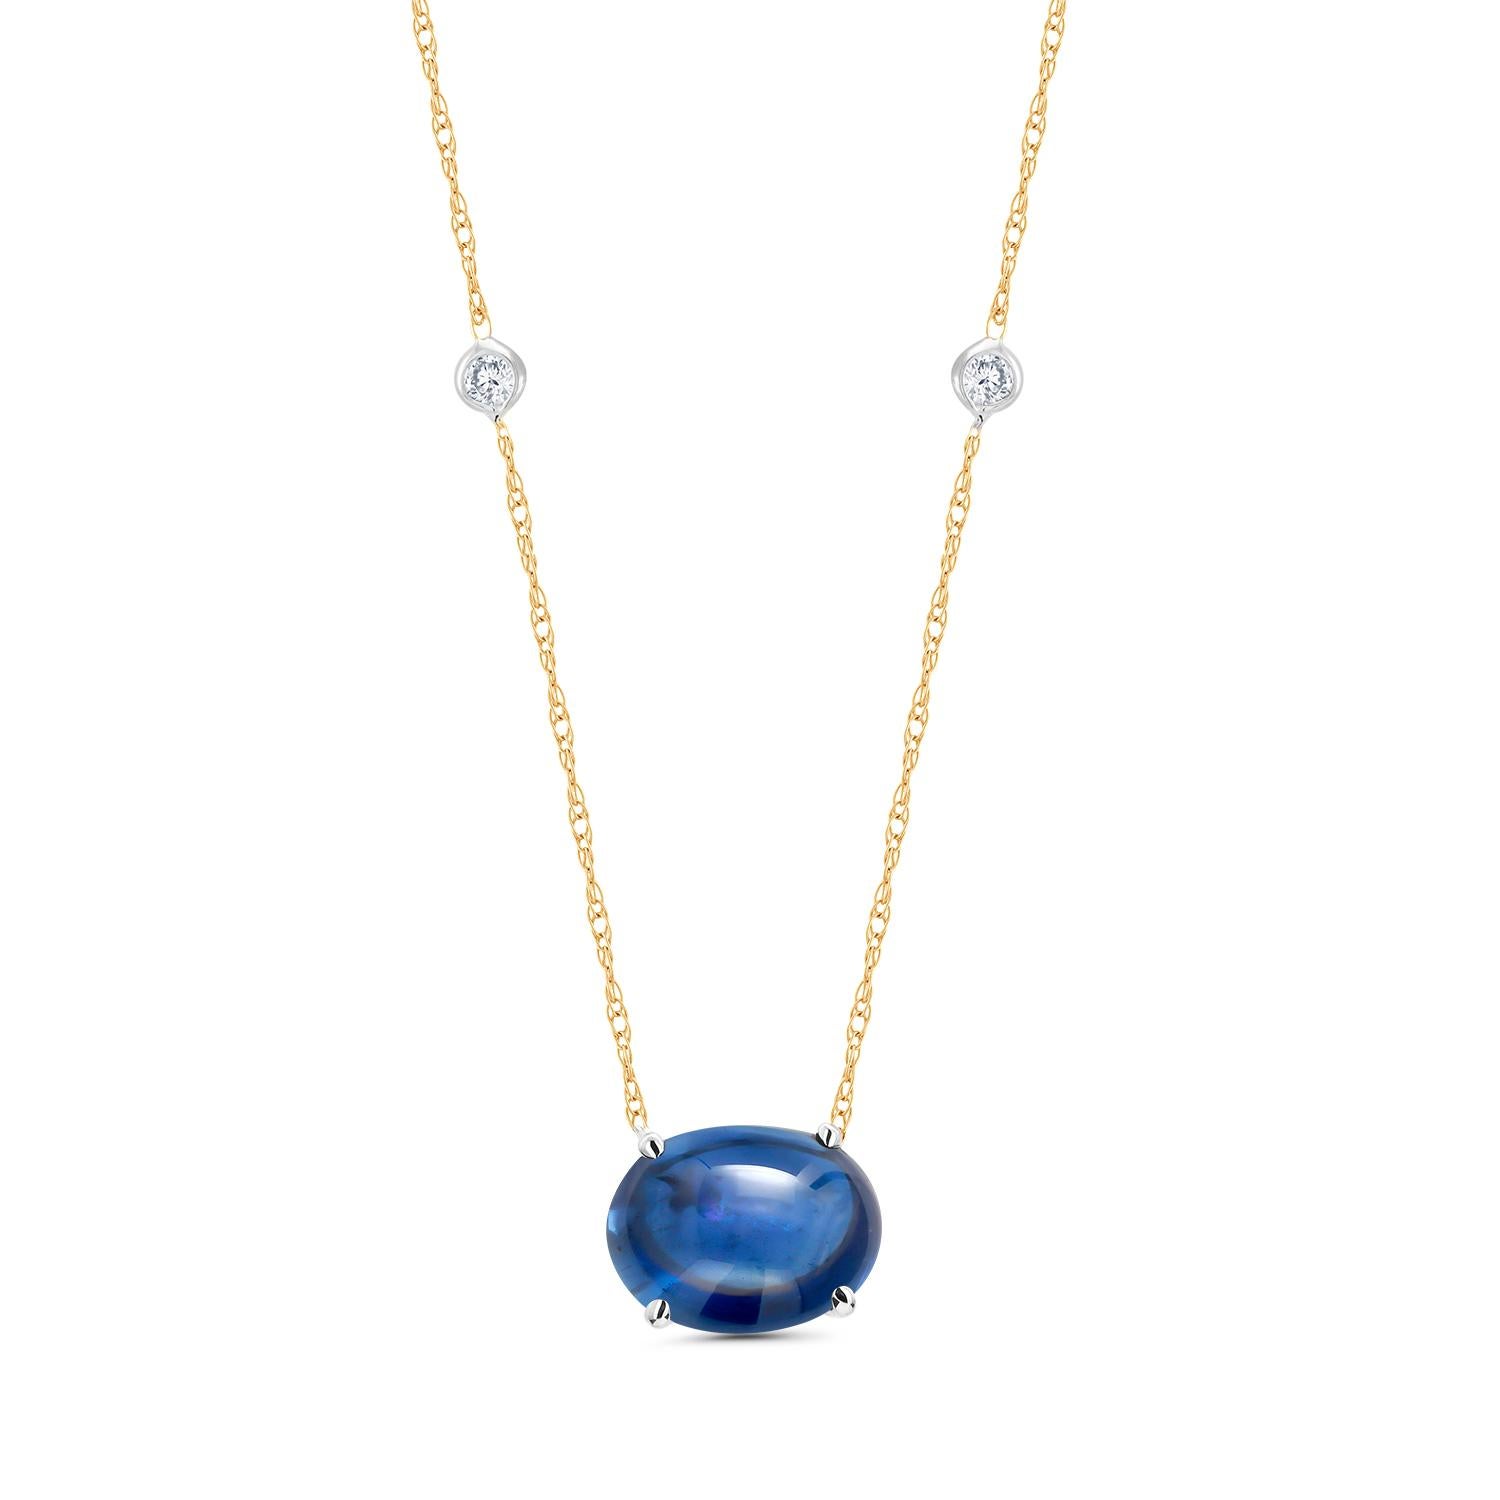 Oval Cut Cabochon Sapphire and Diamonds Set in Bezel Gold Necklace Pendant